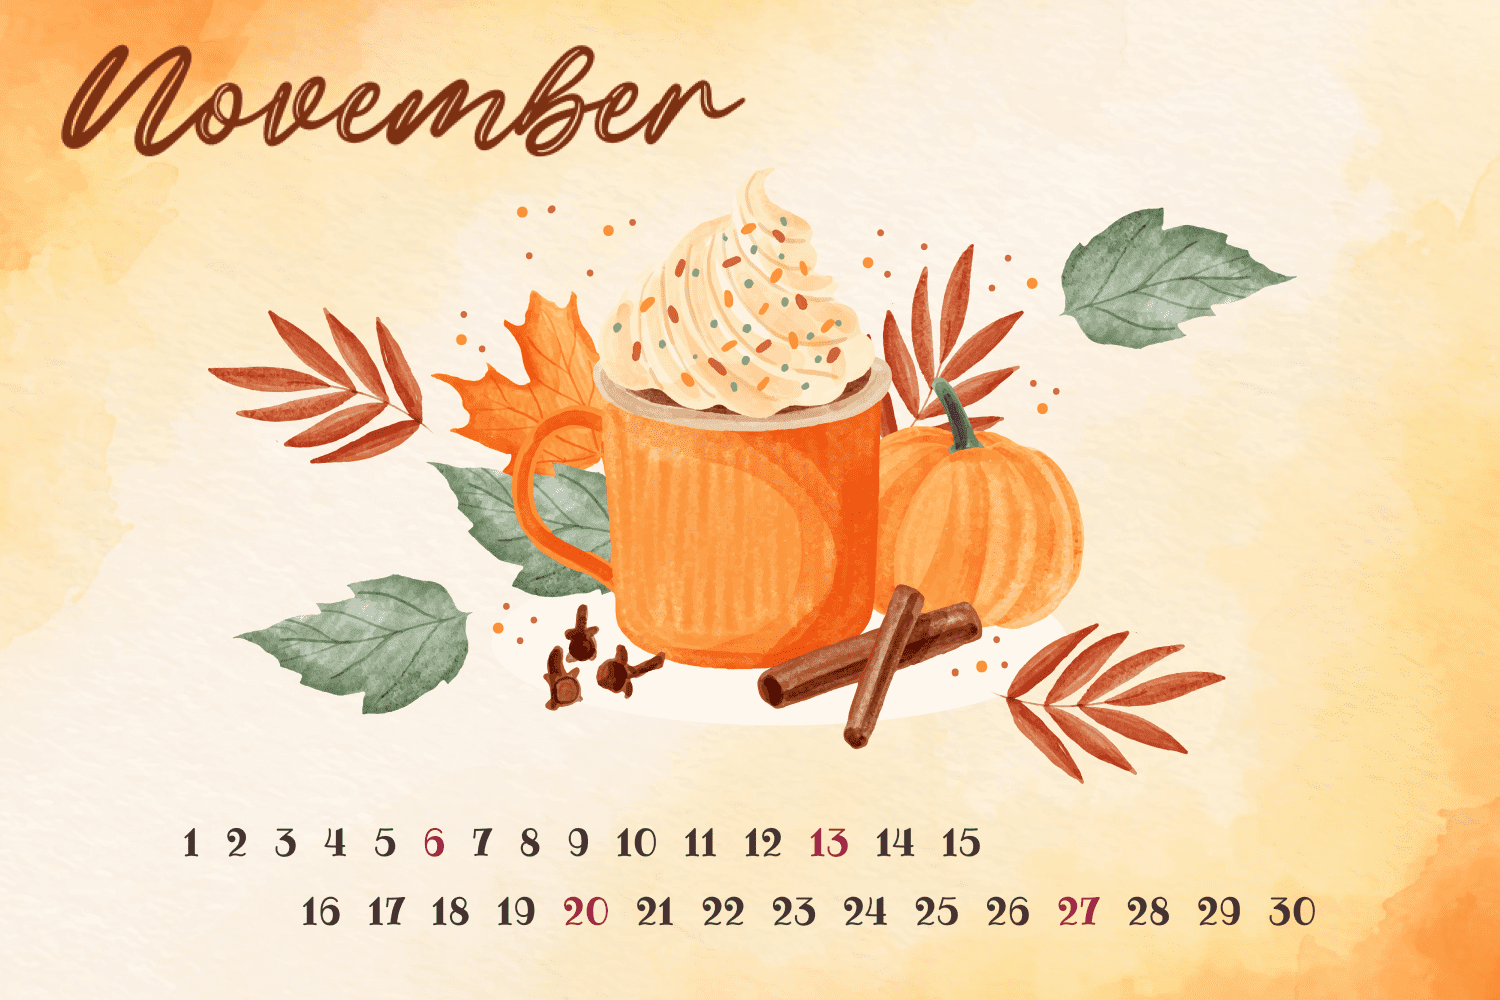 Calendar for november with drawn cup with cream, pumpkin, leaves and cinnamon stick.